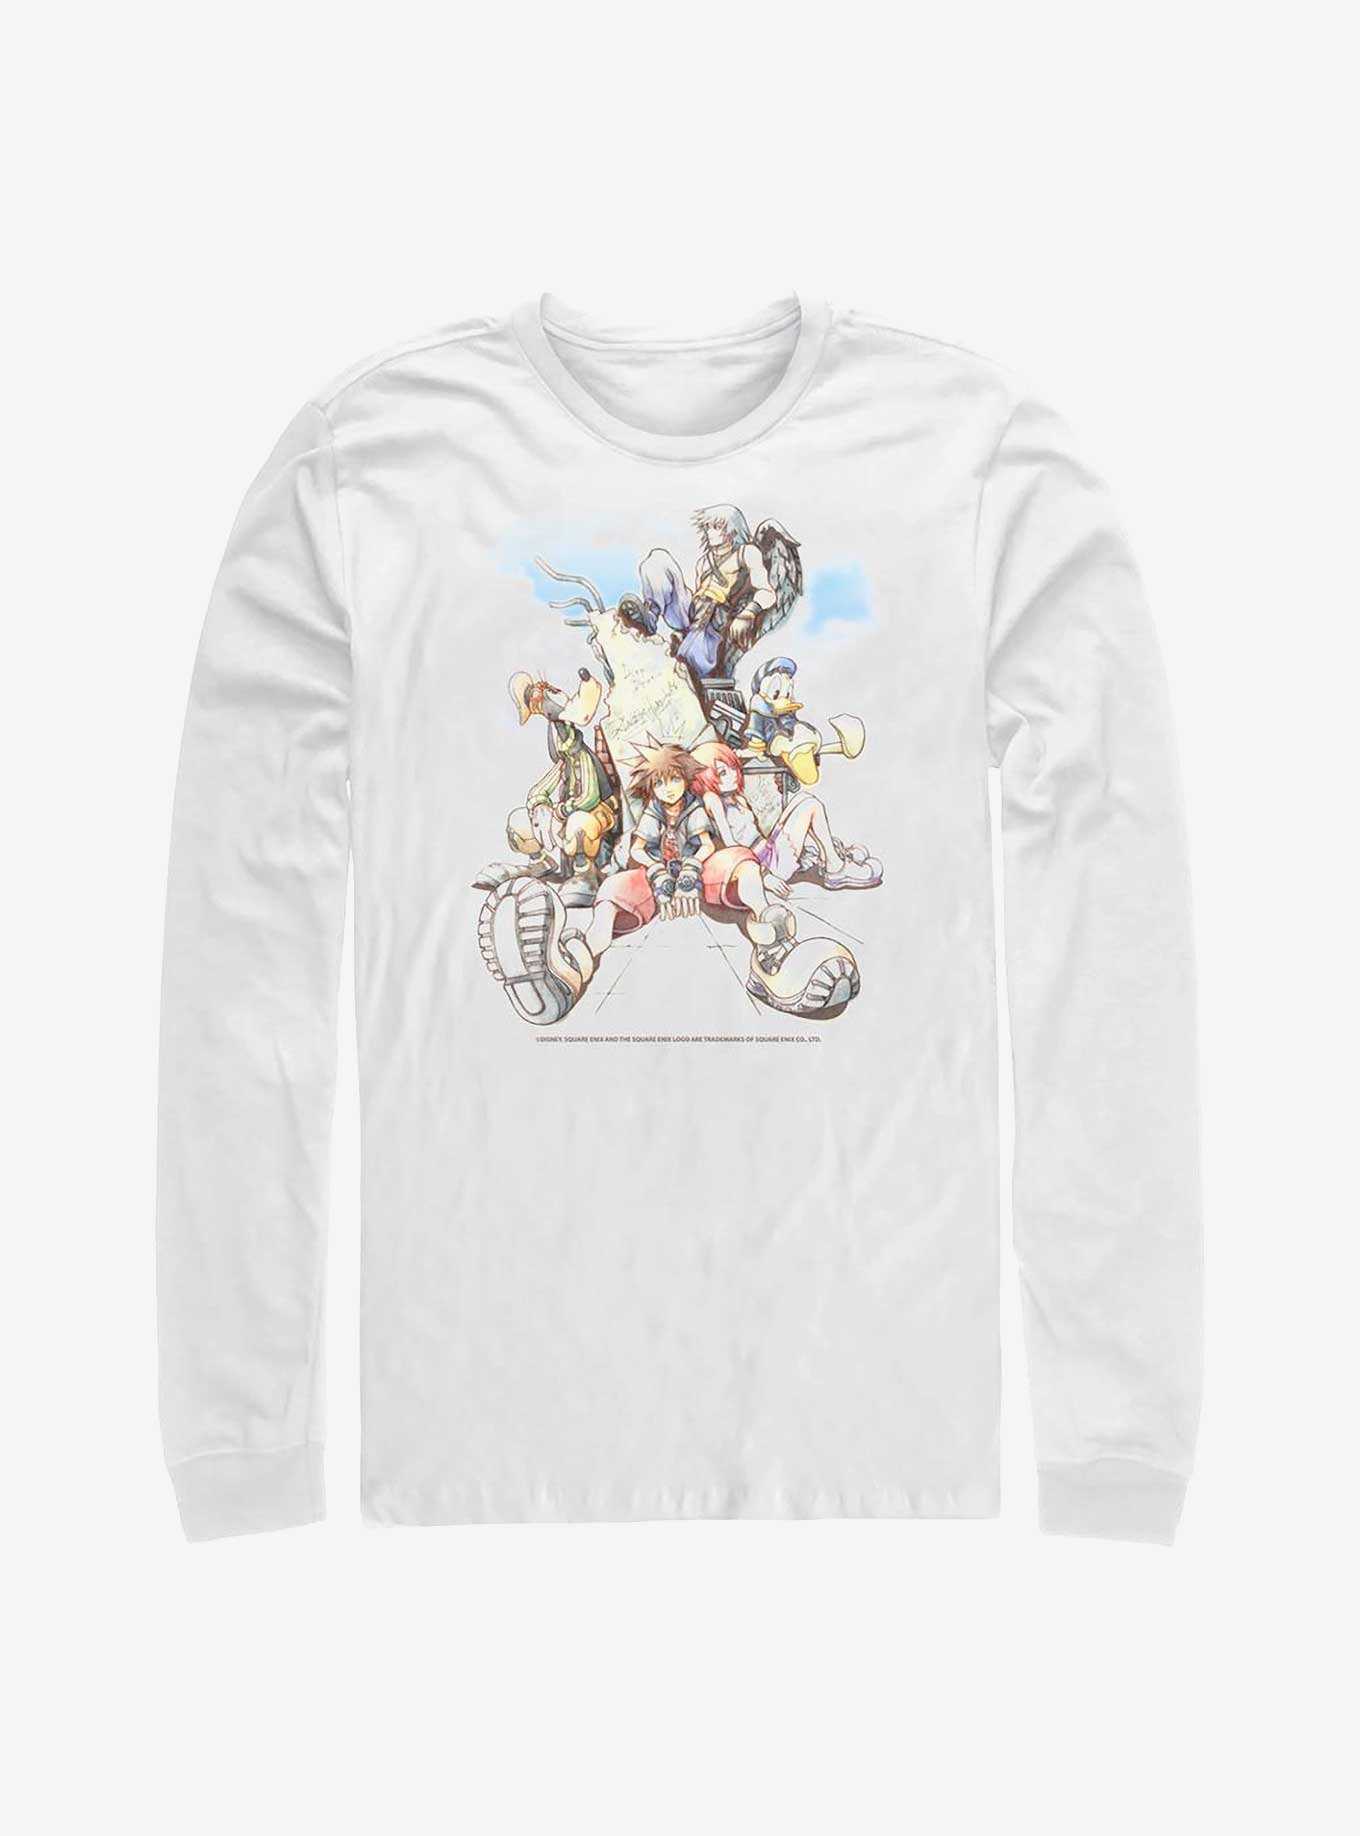 Disney Kingdom Hearts Group In The Clouds Long-Sleeve T-Shirt, , hi-res